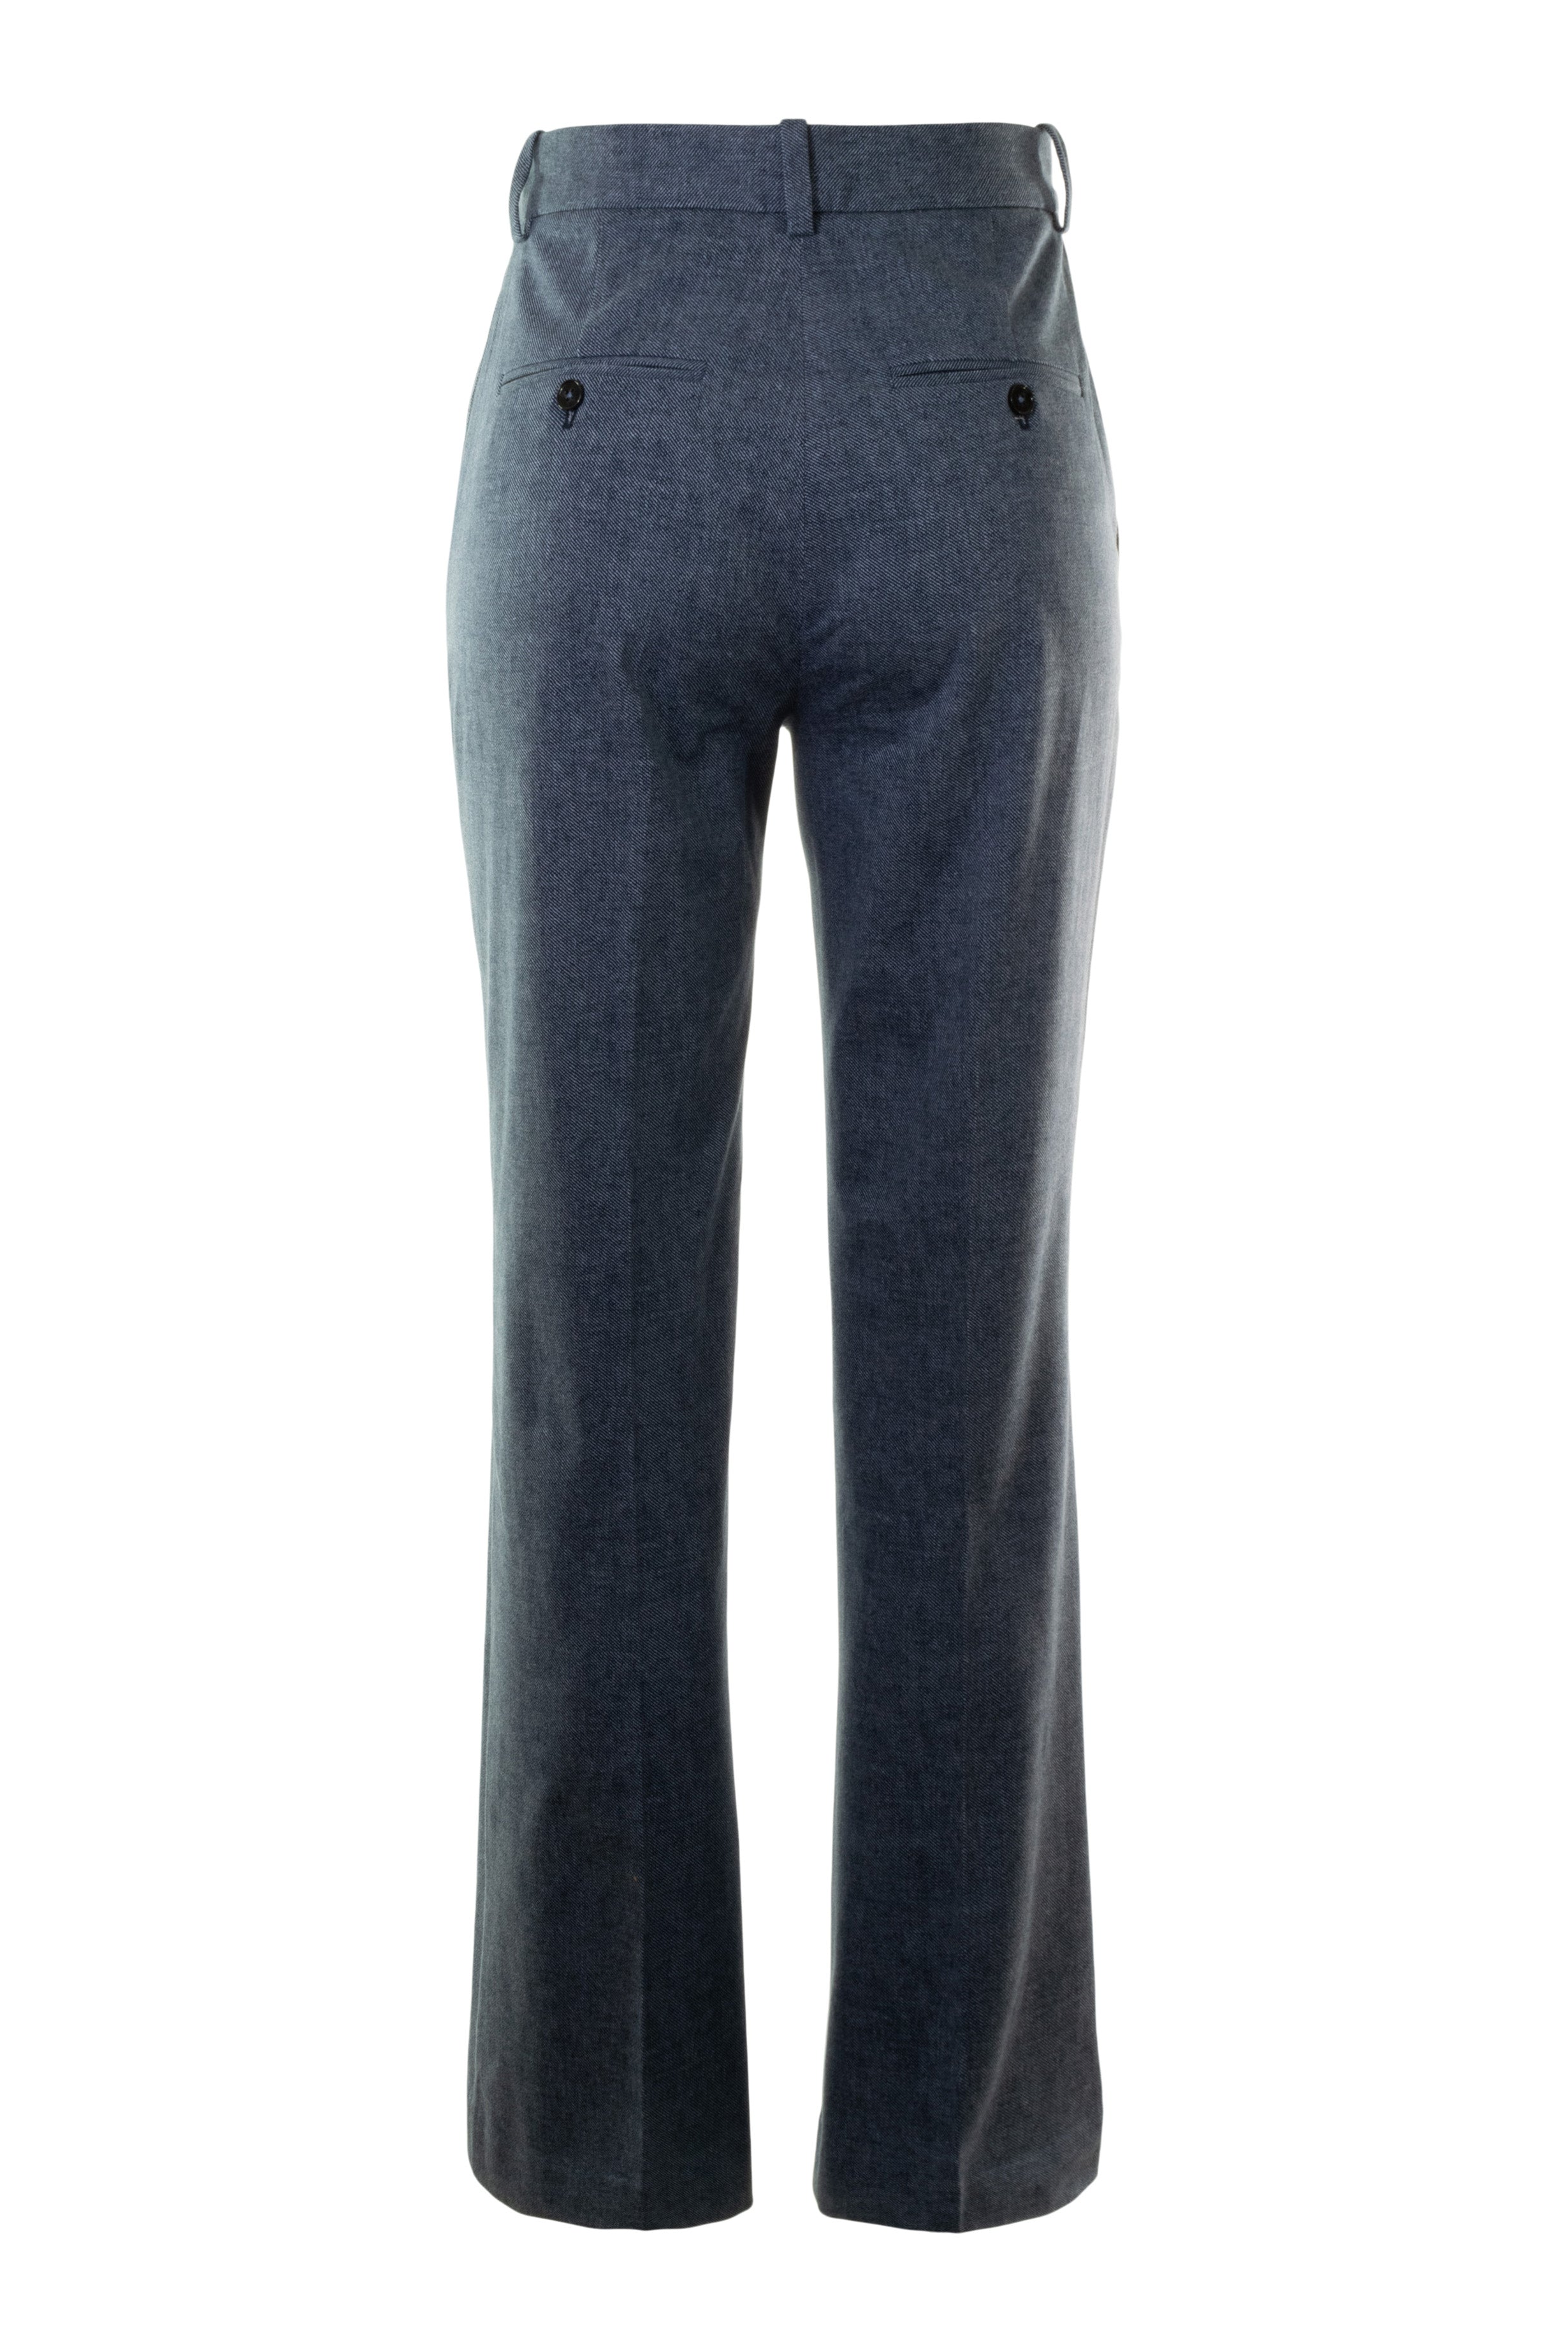 Circolo 1901 Canvas Jersey Pants in Indaco